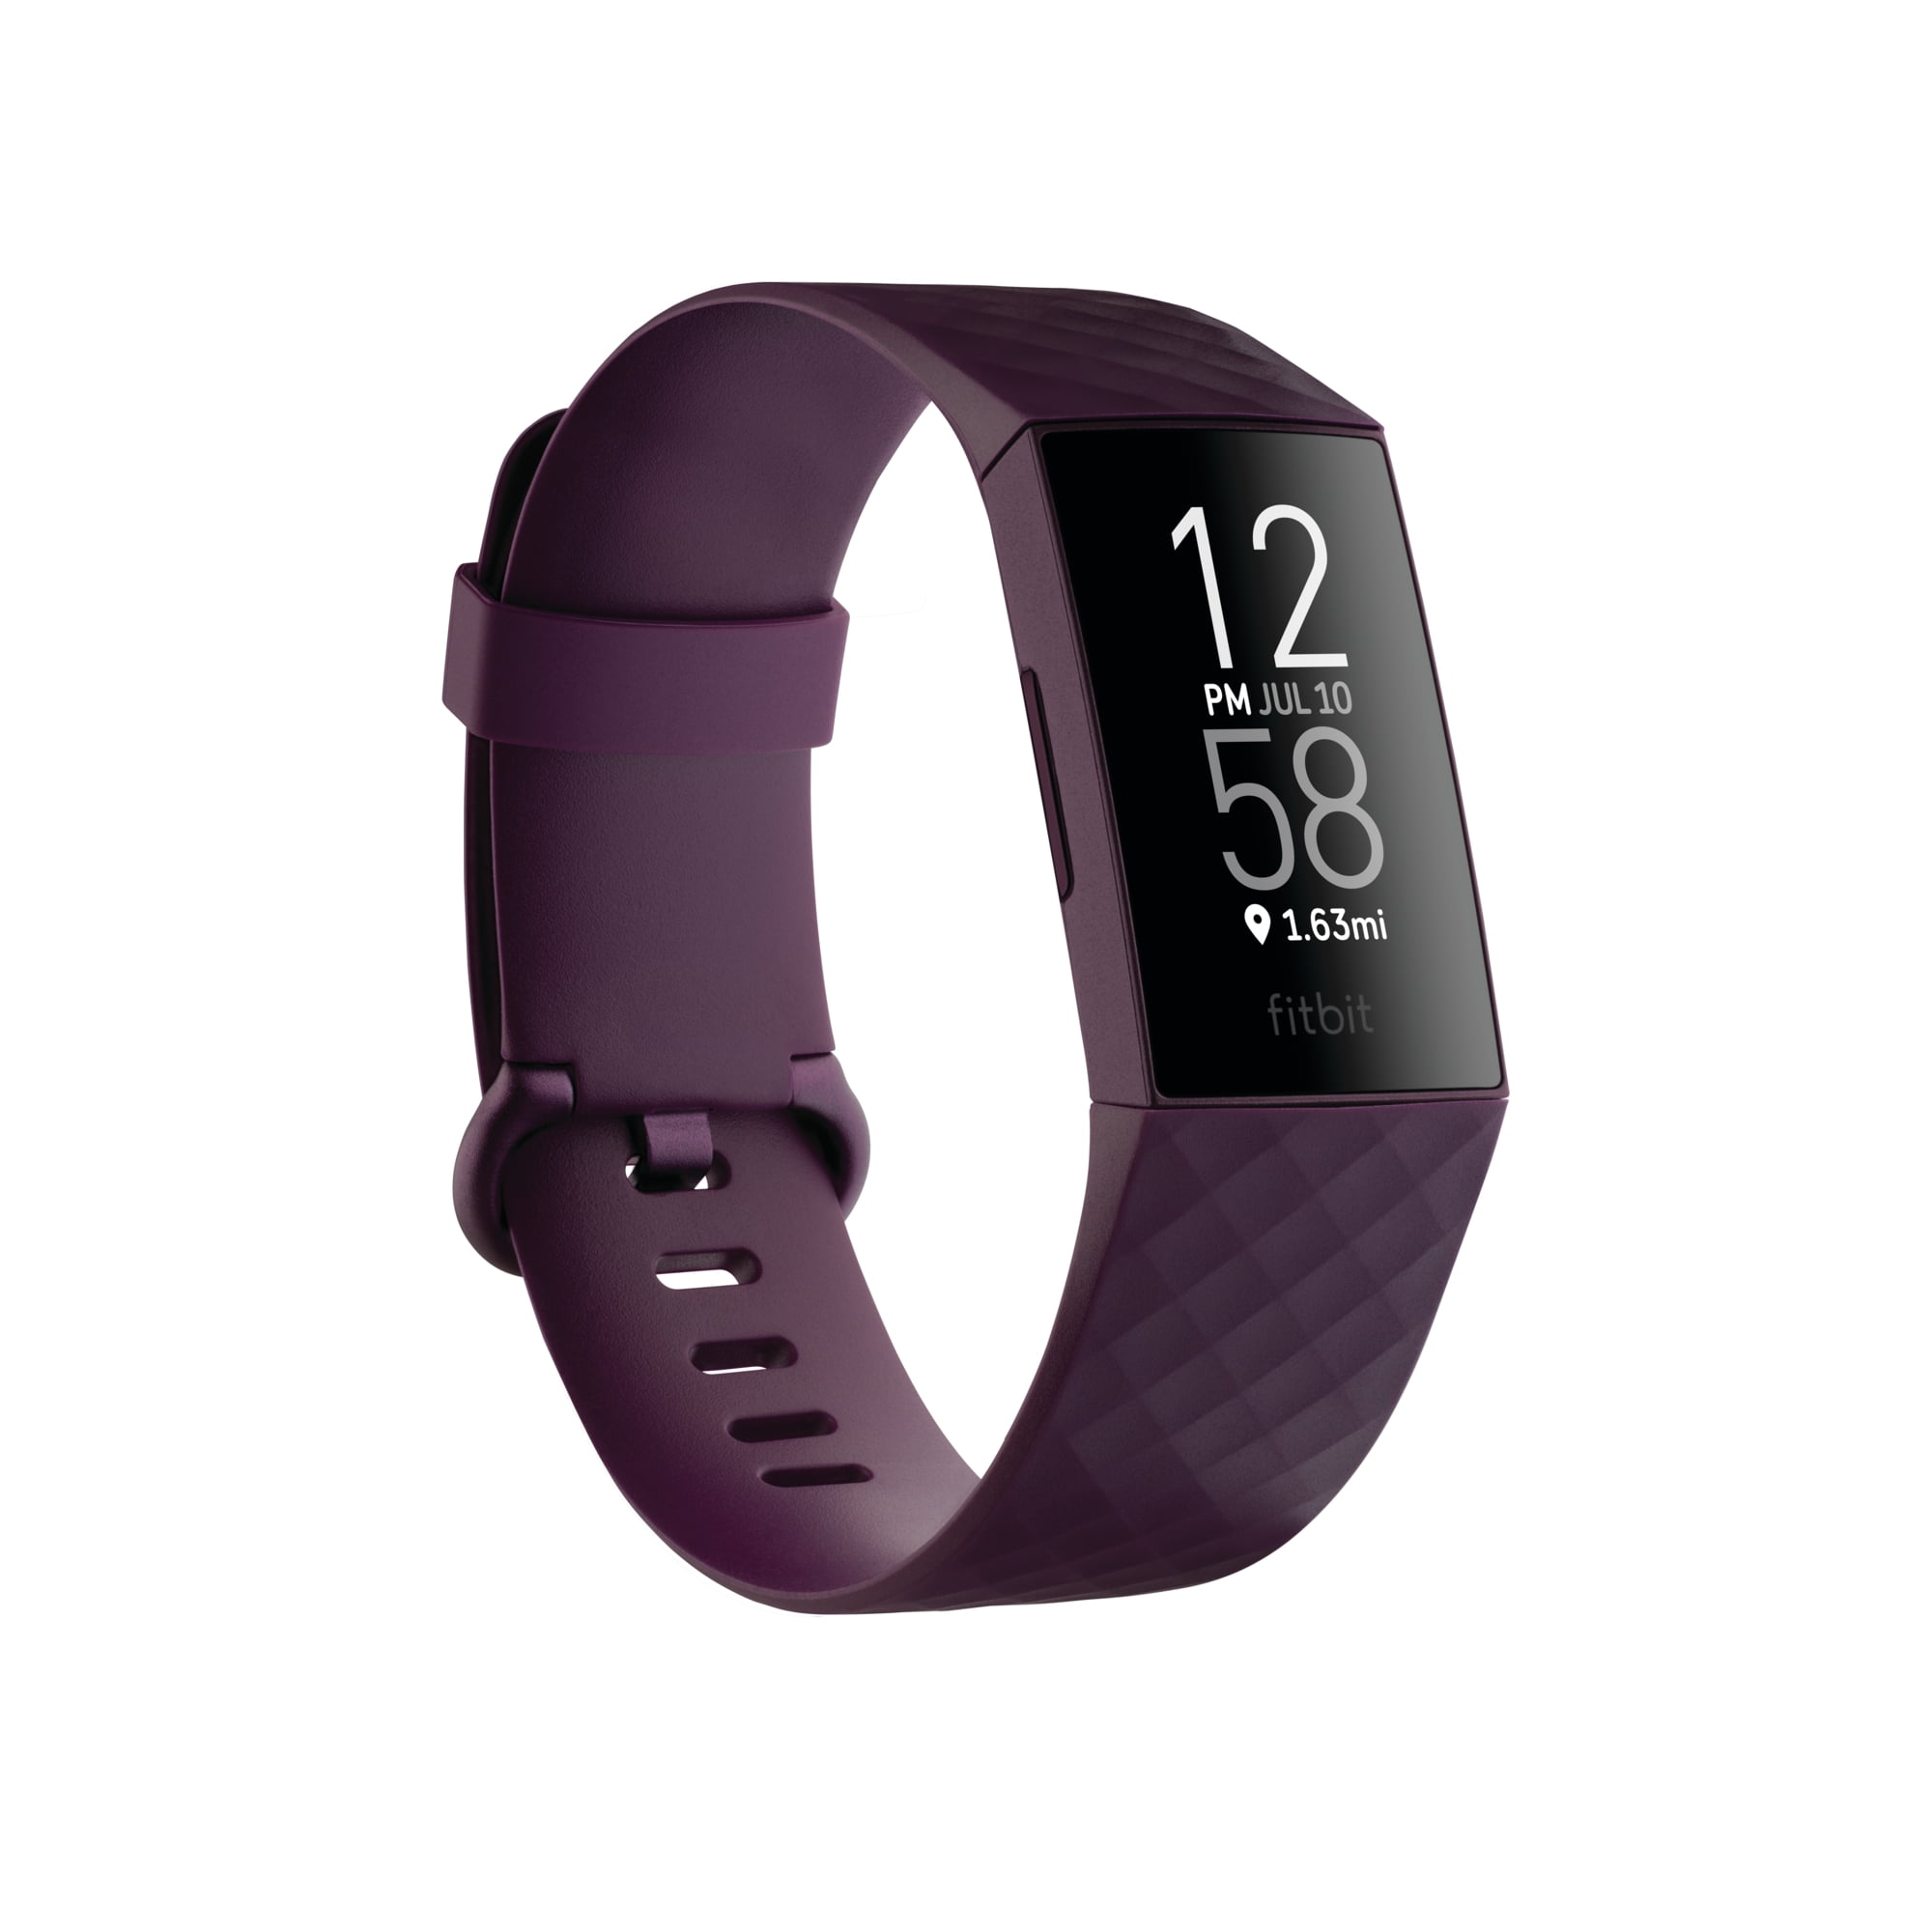 FITBIT CHARGE 1 Wristband Fitness Activity Tracker Black Small 